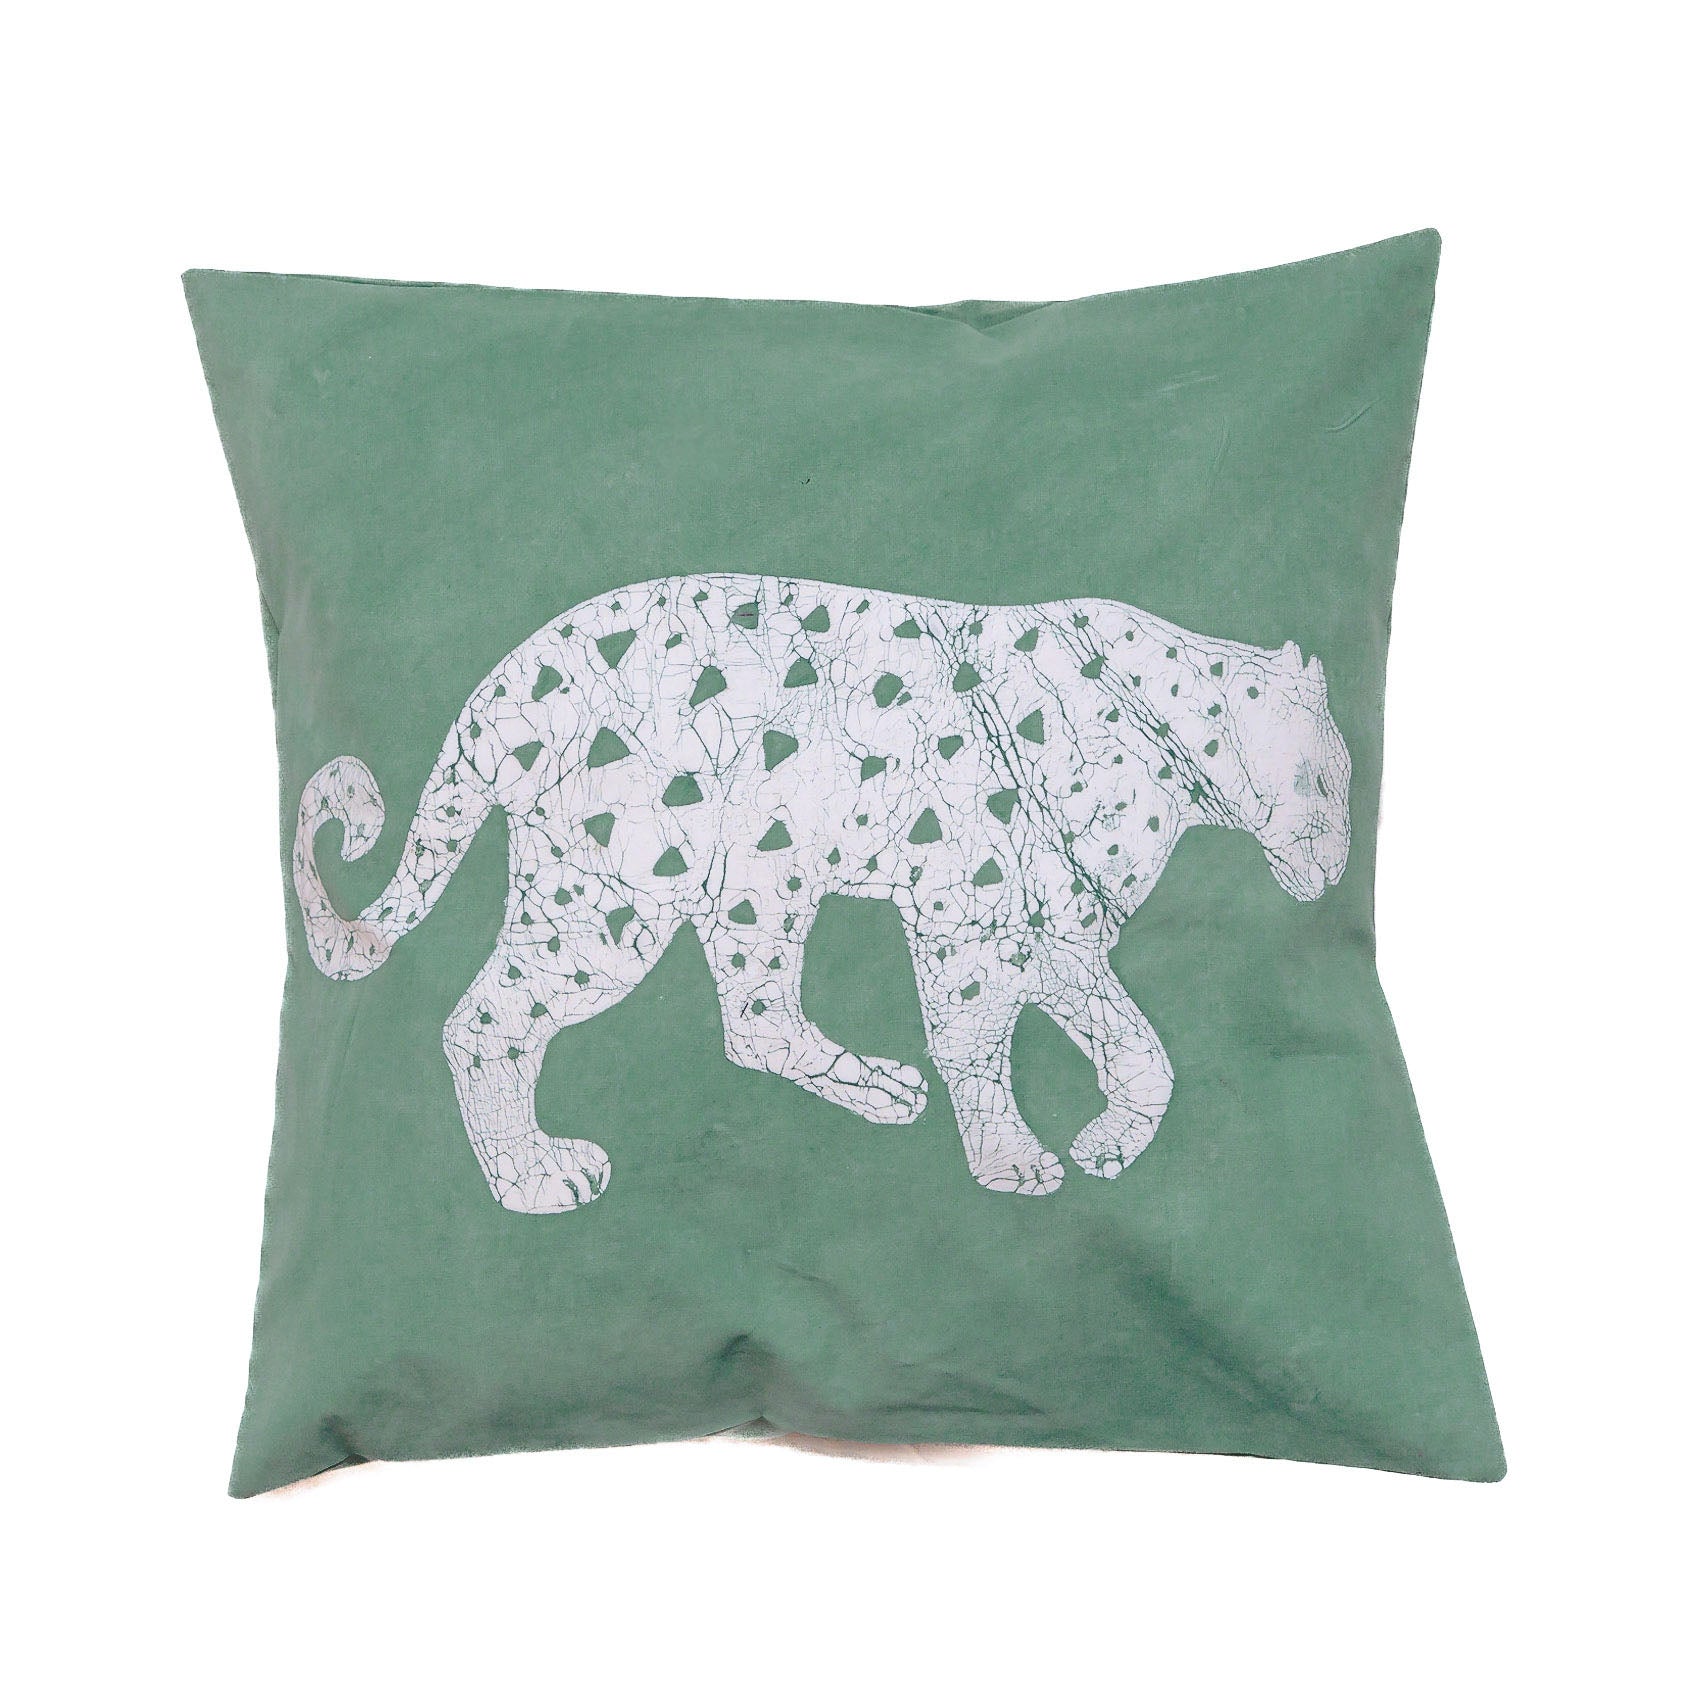 Mwana Leopard Cushion Cover - Light Green - Hand Painted by TRIBAL TEXTILES - Handcrafted Home Decor Interiors - African Made